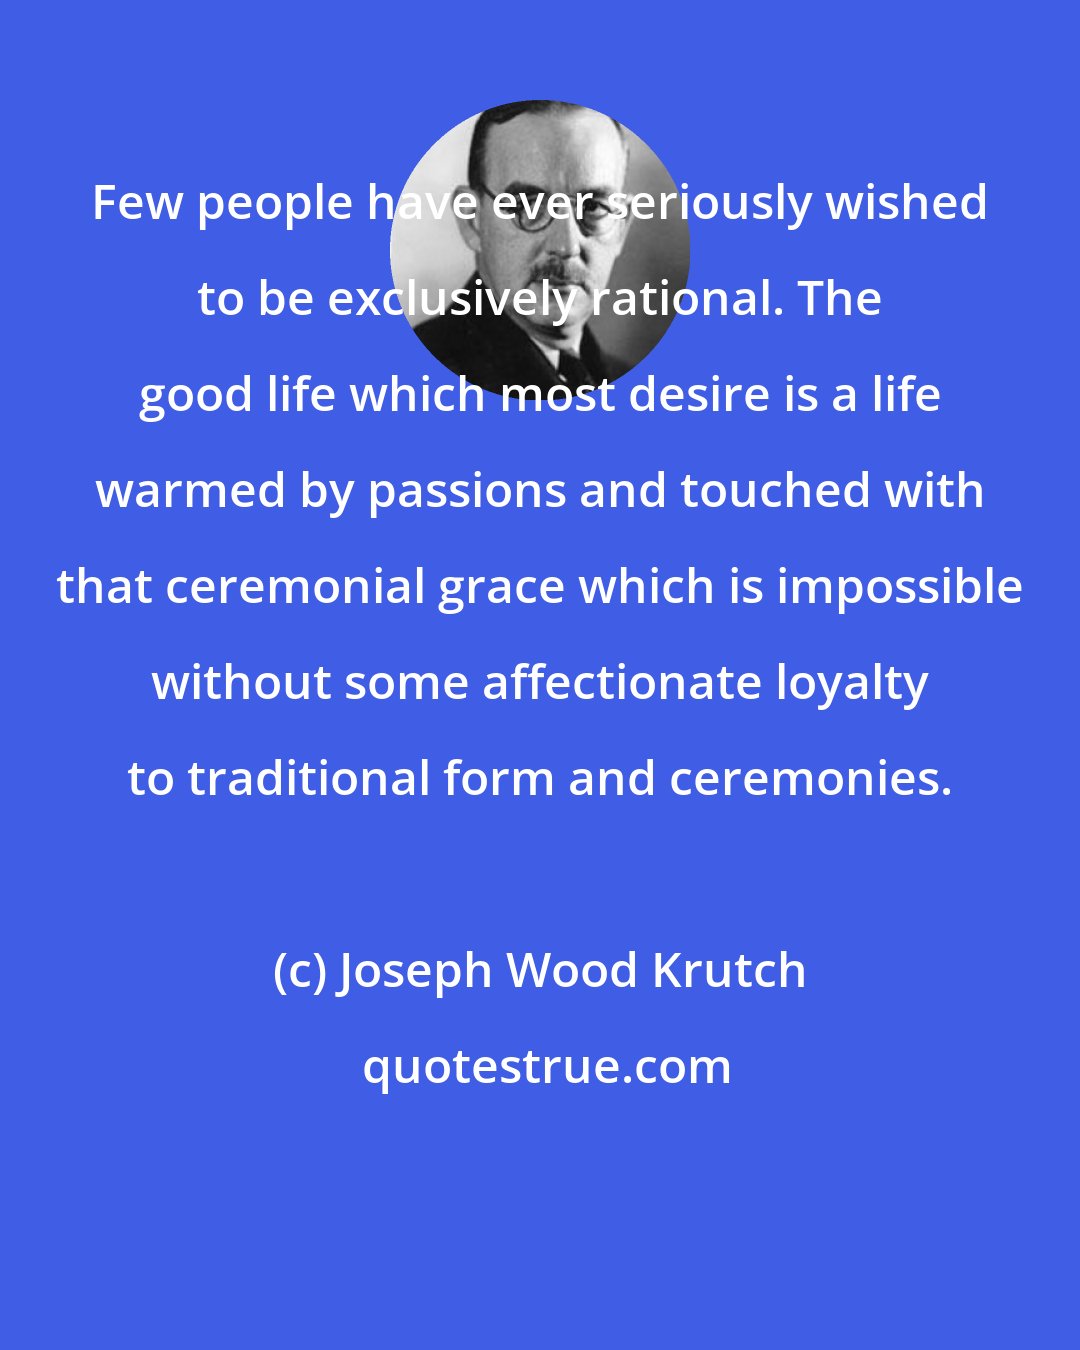 Joseph Wood Krutch: Few people have ever seriously wished to be exclusively rational. The good life which most desire is a life warmed by passions and touched with that ceremonial grace which is impossible without some affectionate loyalty to traditional form and ceremonies.